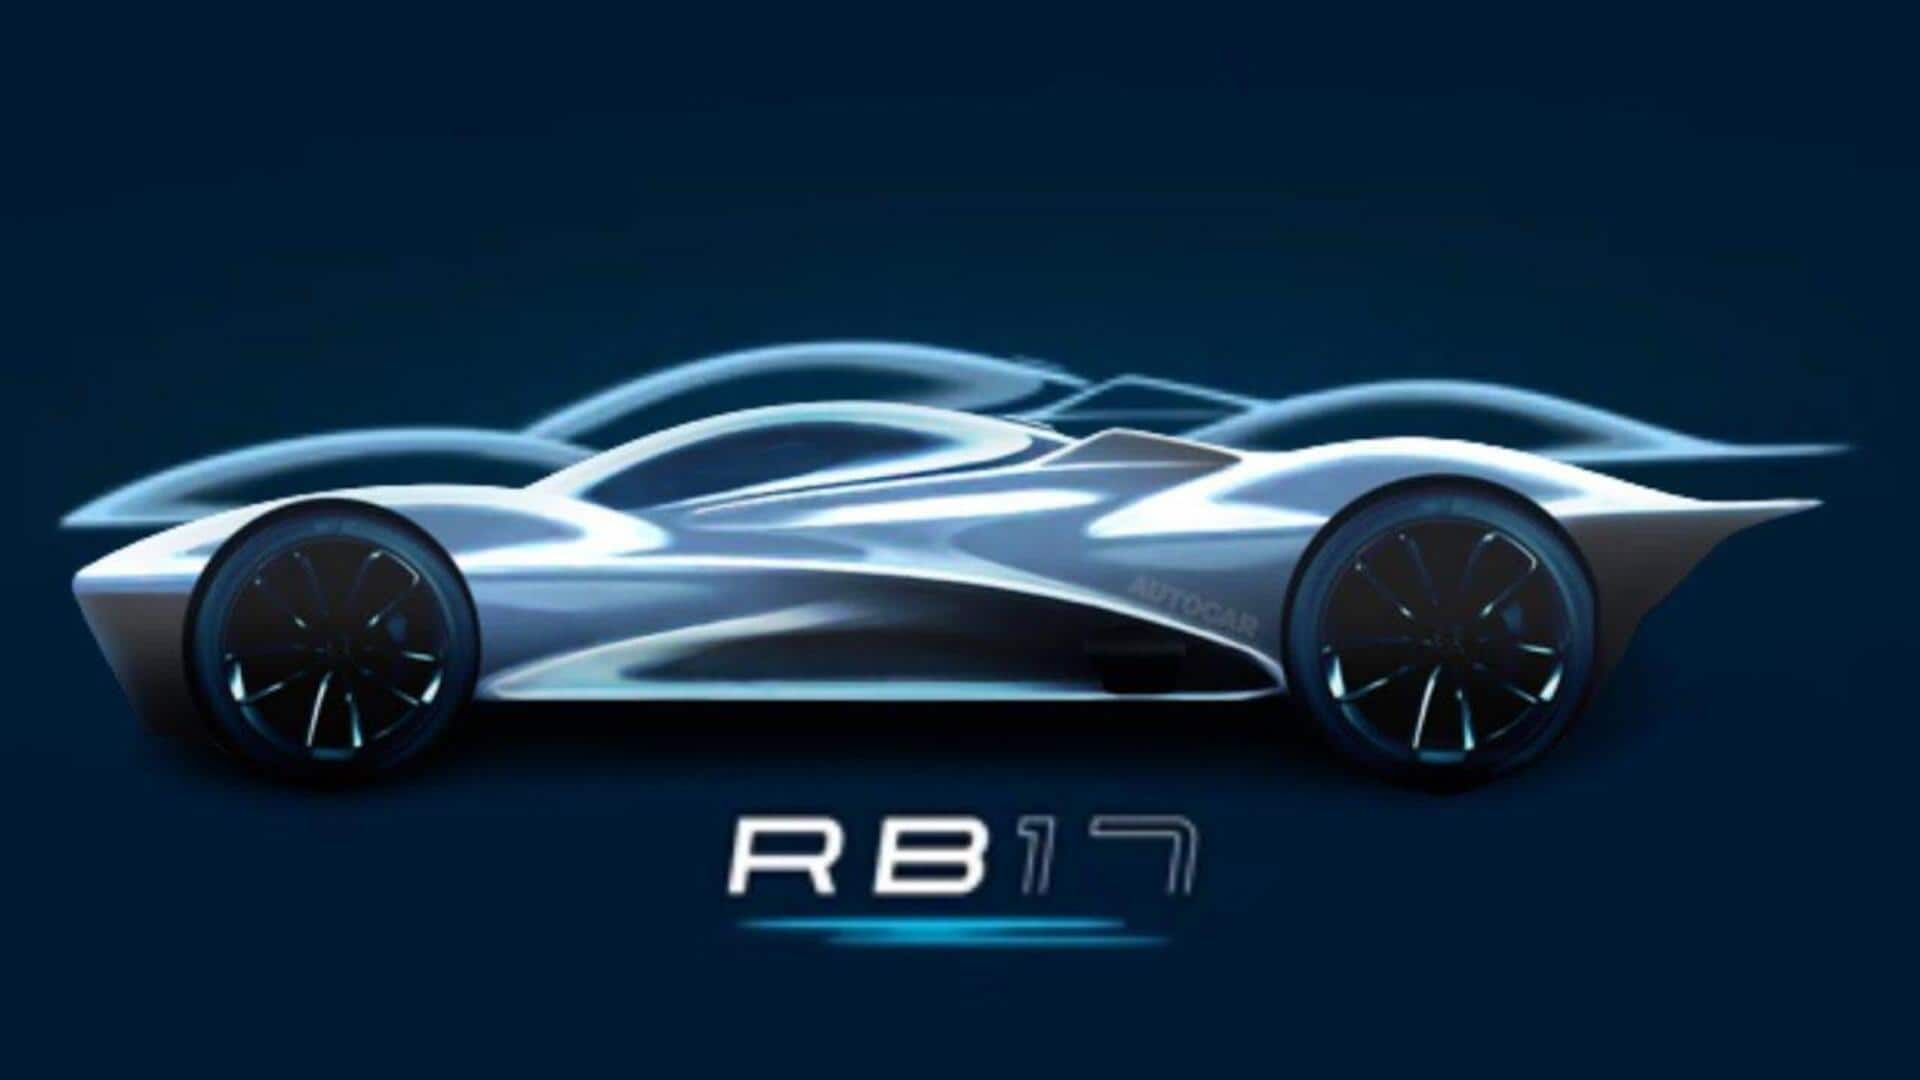 Red Bull's first hypercar, RB17, will be available in 2026